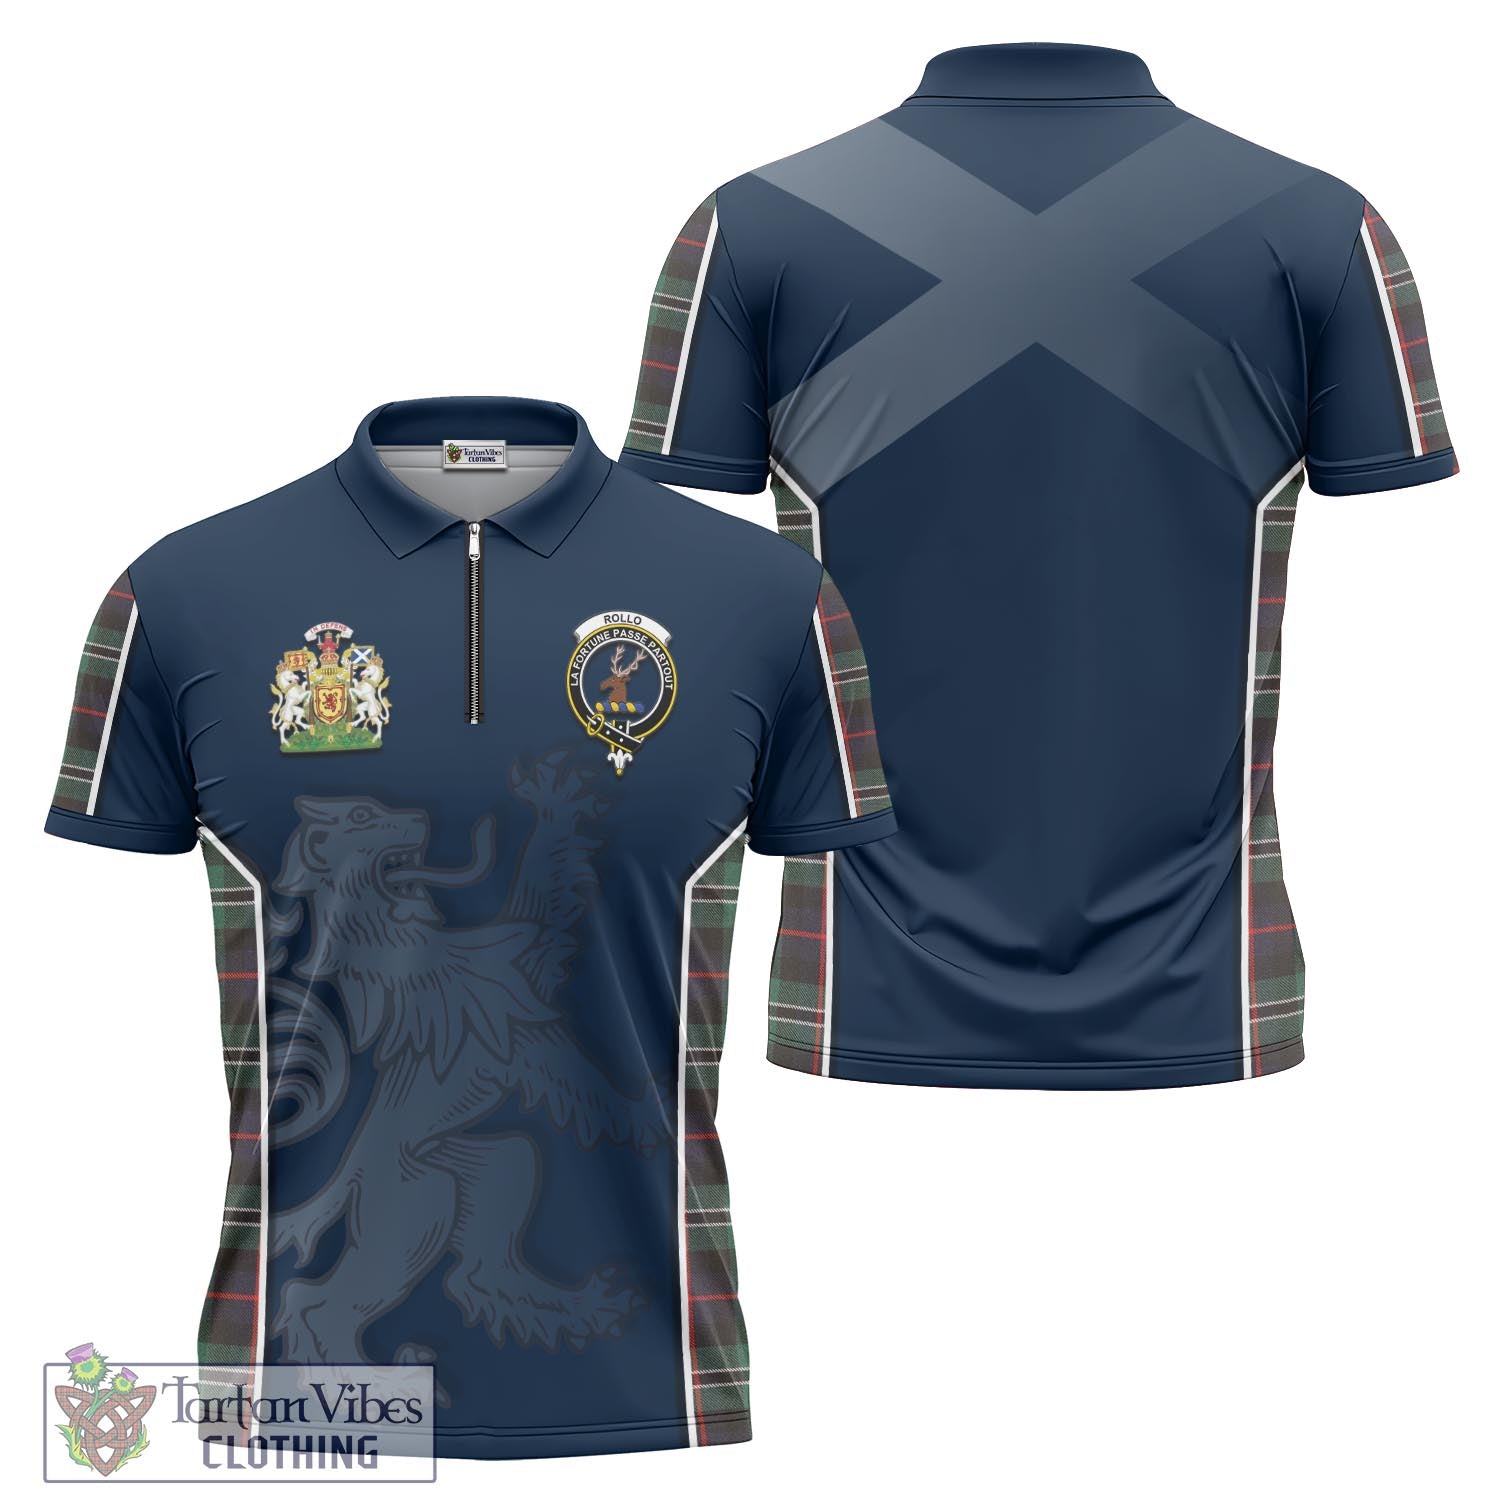 Tartan Vibes Clothing Rollo Hunting Tartan Zipper Polo Shirt with Family Crest and Lion Rampant Vibes Sport Style